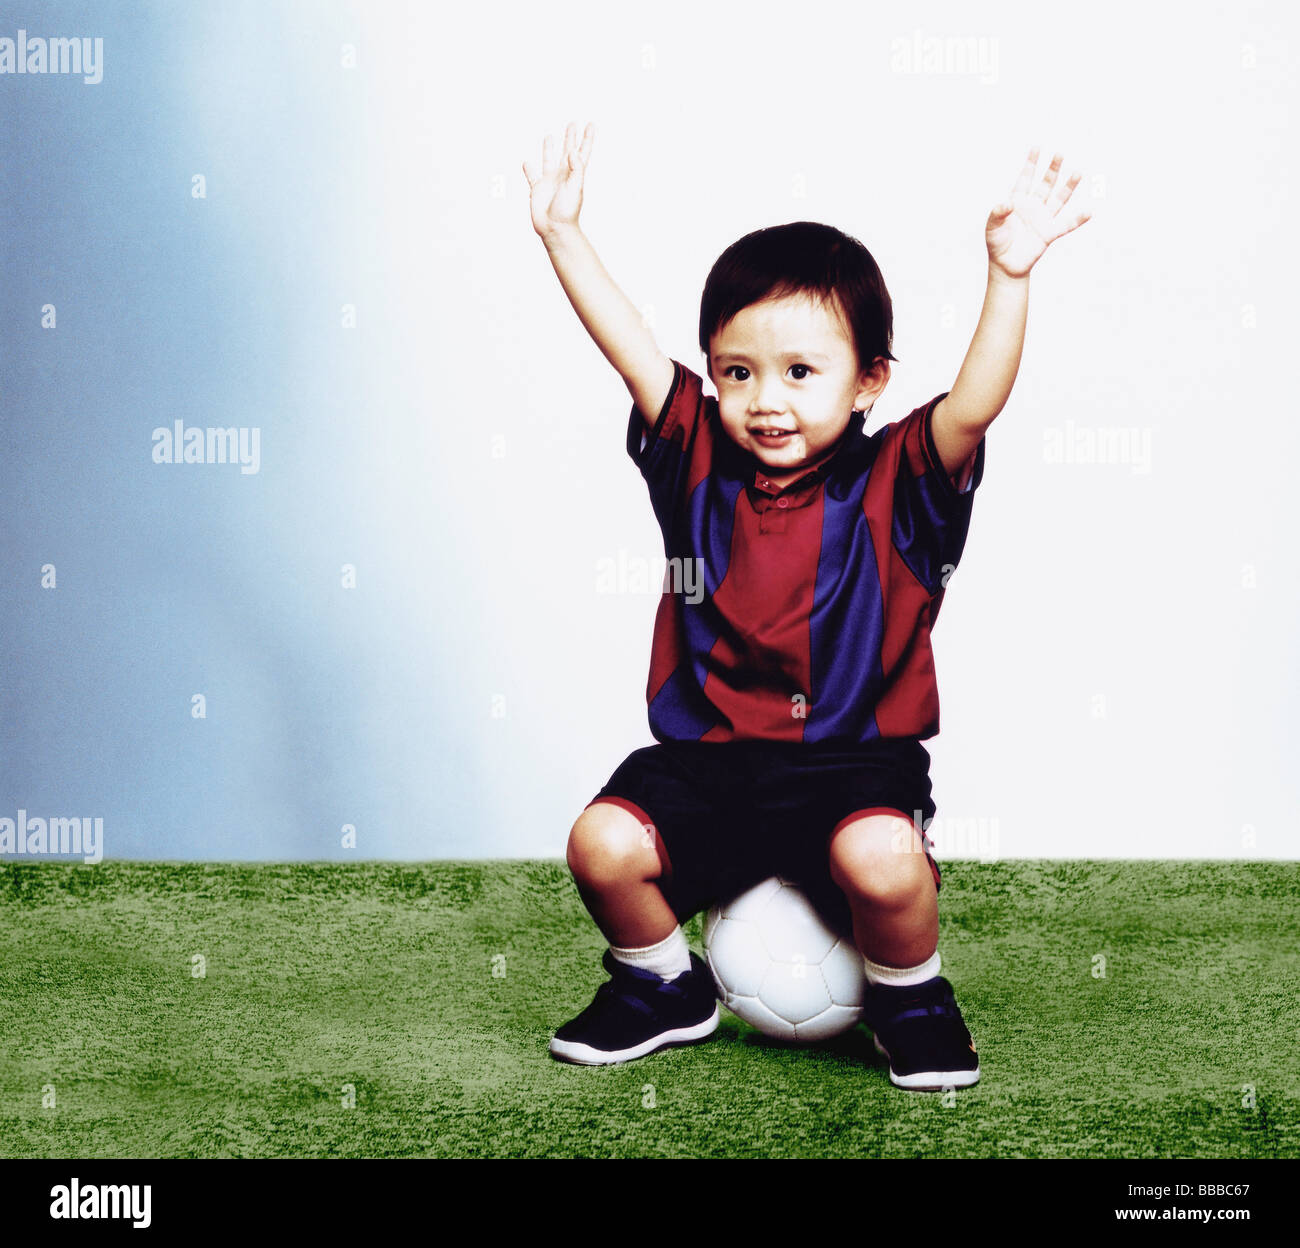 Young boy sitting on soccer ball with arms in the air Stock Photo